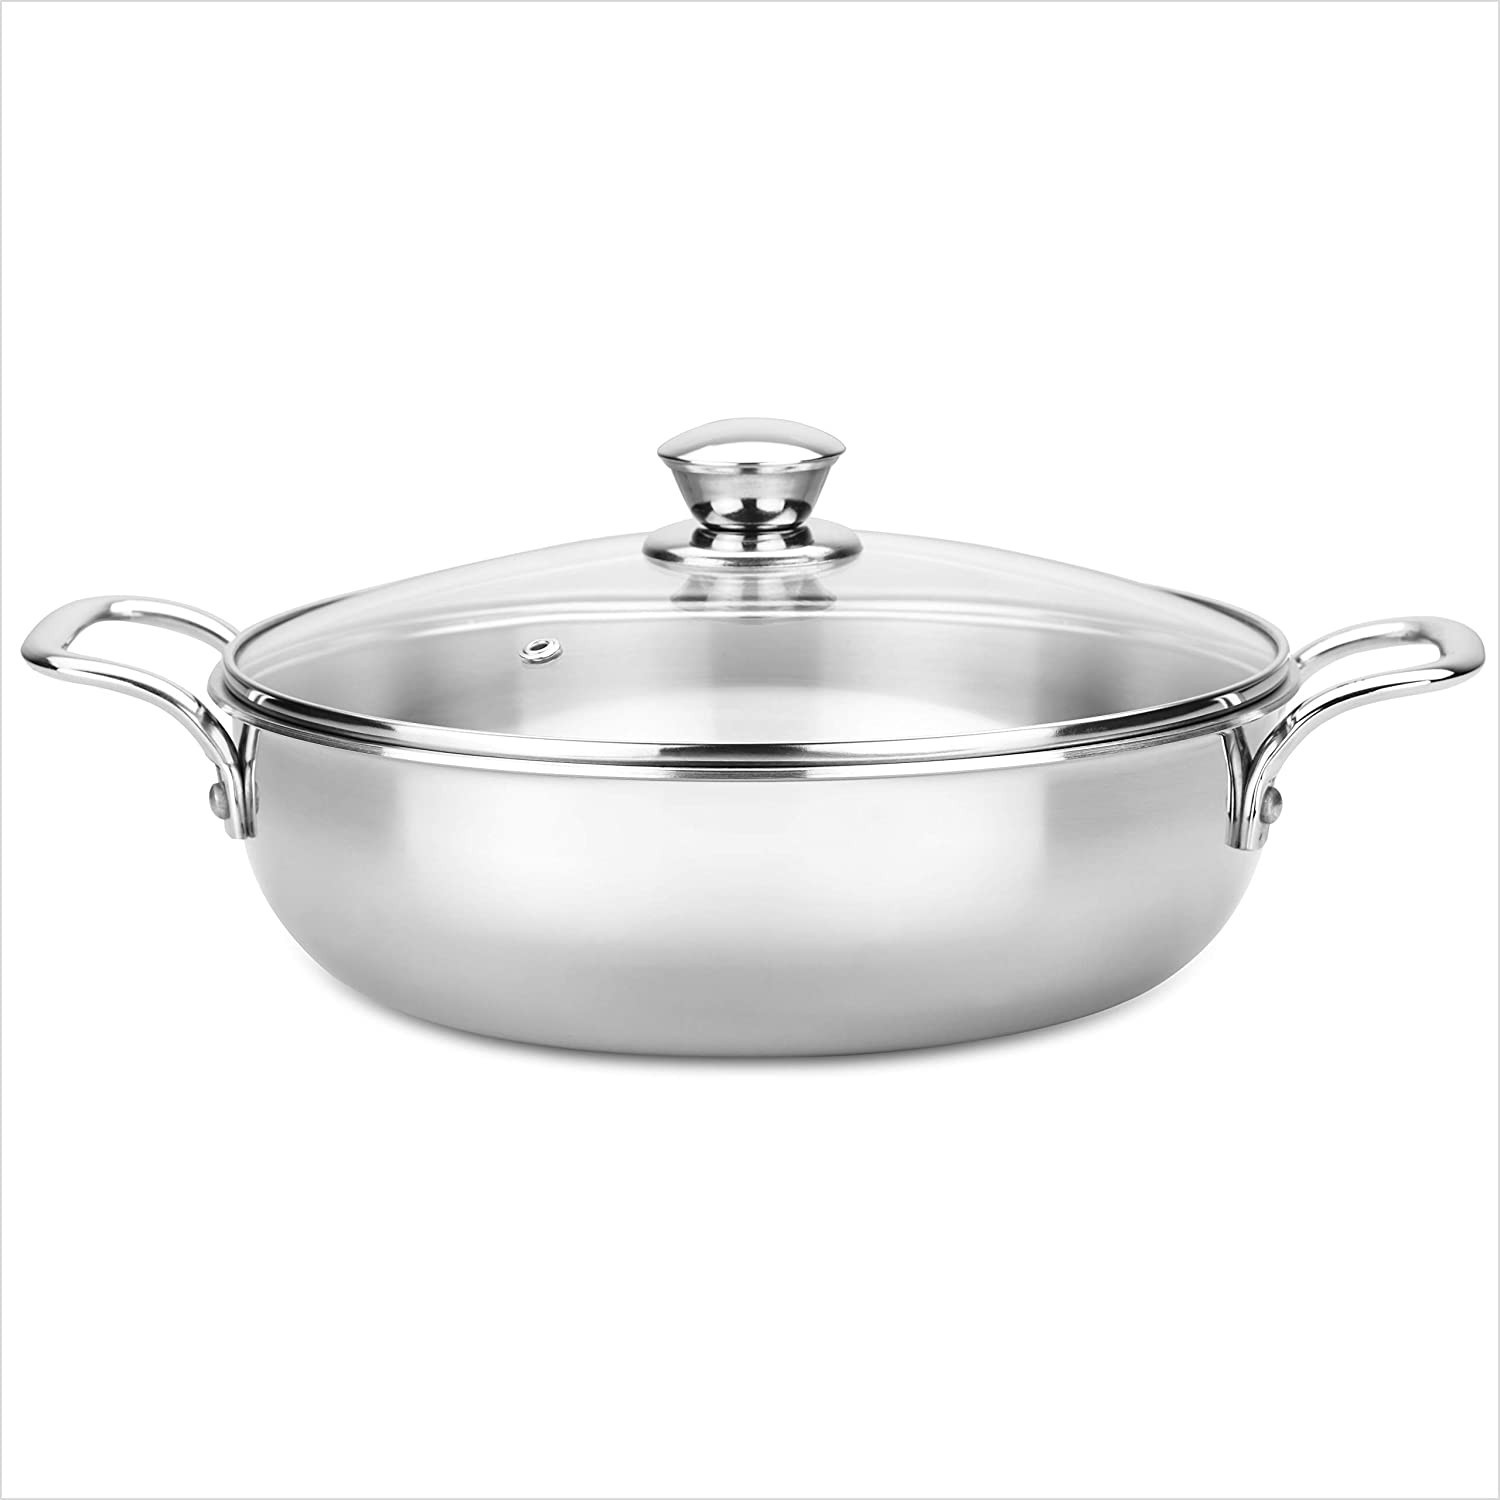 stainless-steel-kadai-tri-ply-14-inch-with-lid-flat-hard-base1